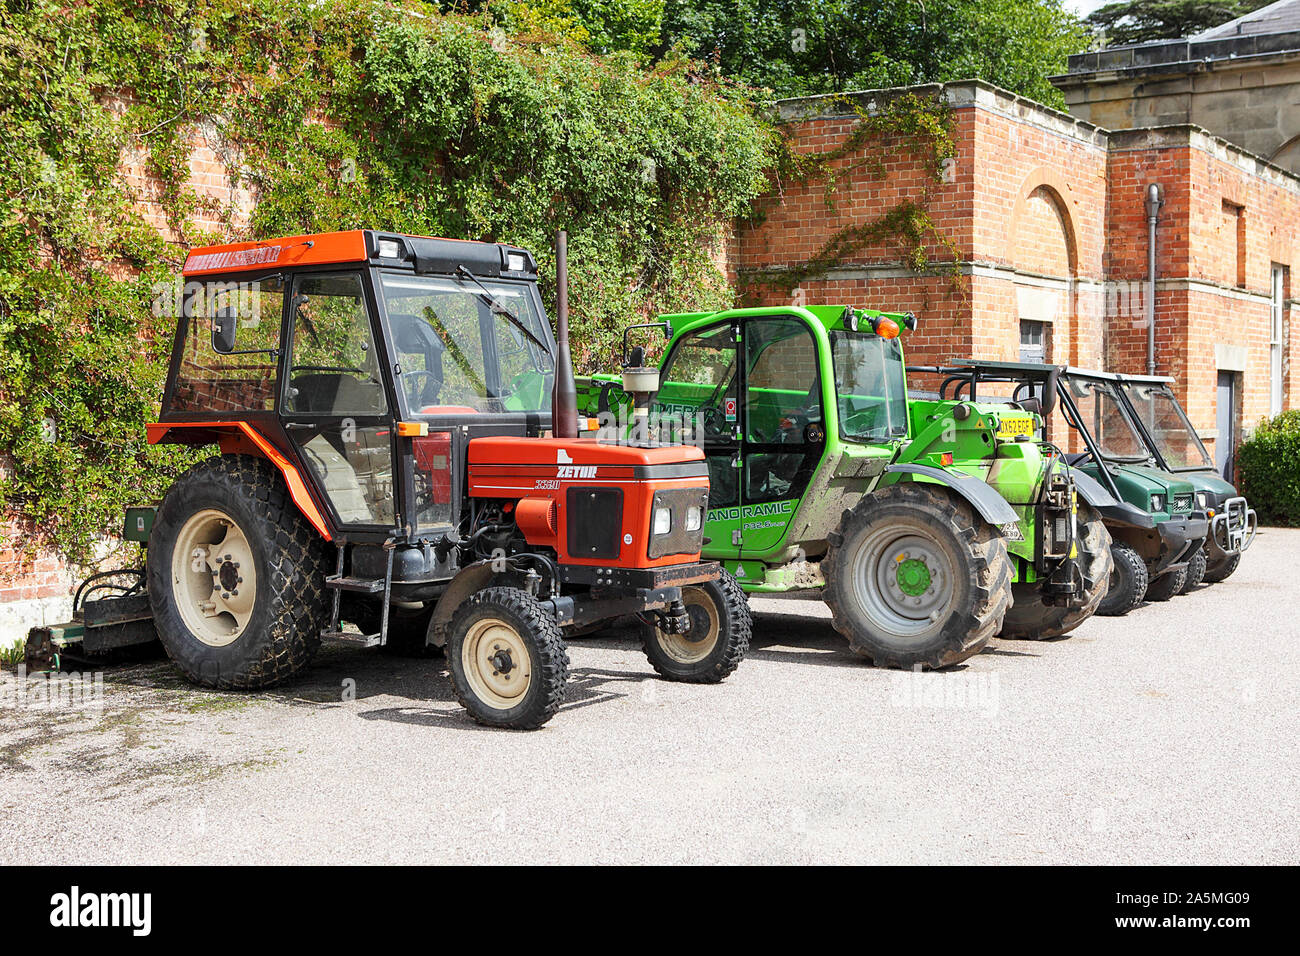 Viewed here is are estate management vehicles used widely in a country setting in Shropshire, England. Stock Photo